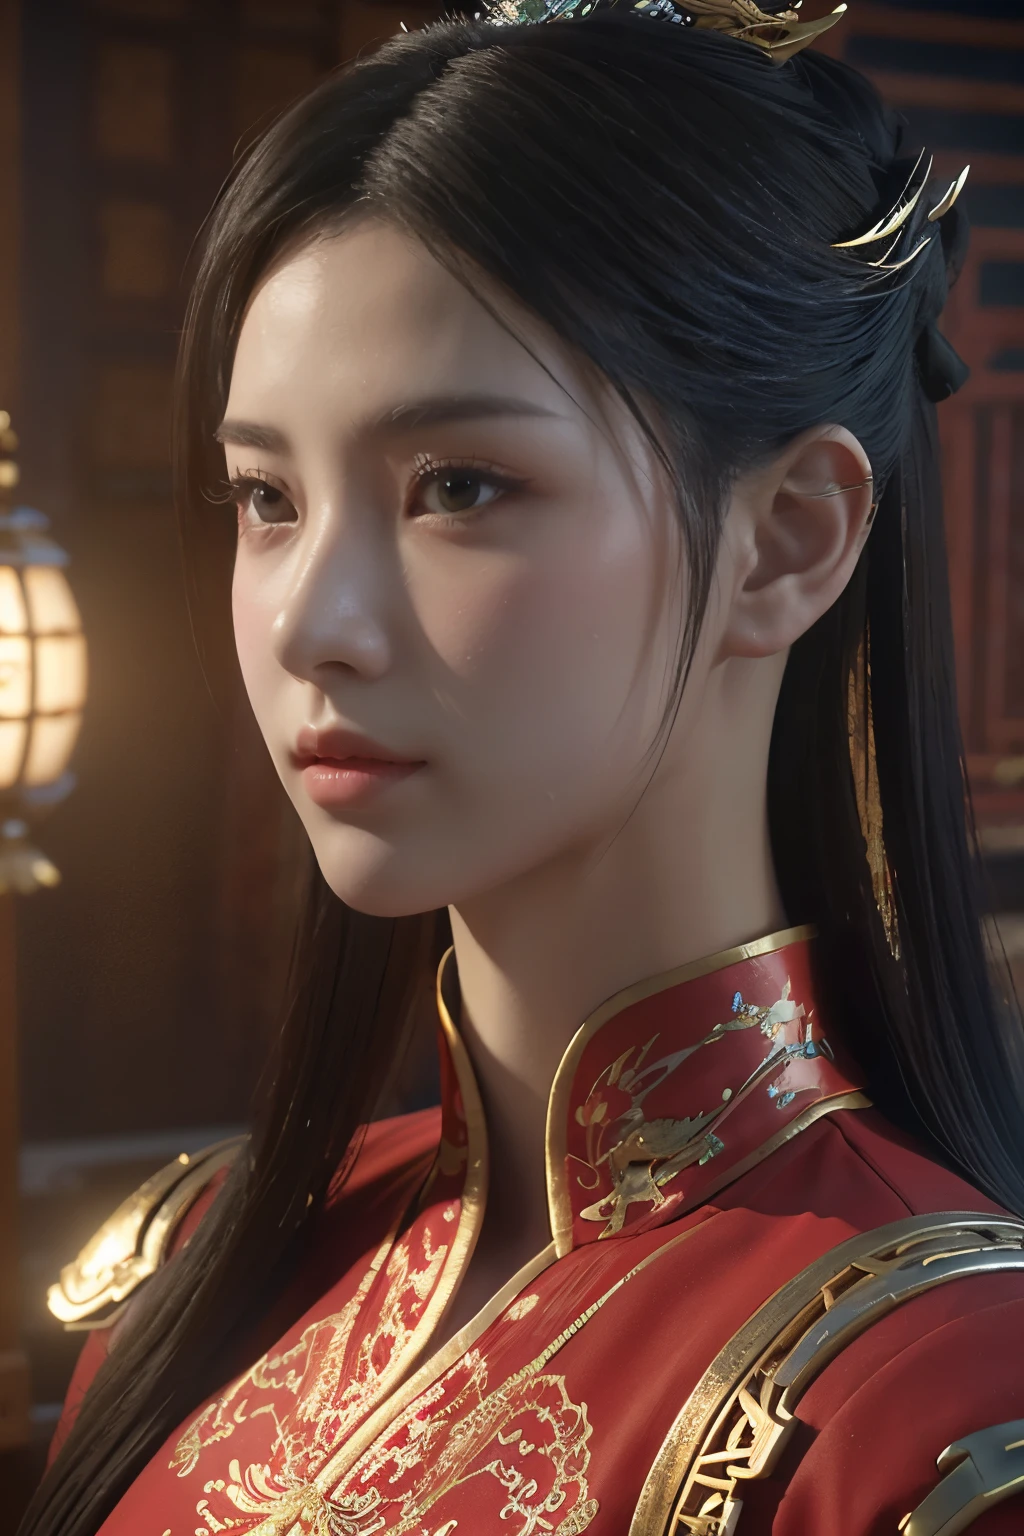 Masterpiece,Game art,The best picture quality,Highest resolution,8K,(Portrait:1.5),Unreal Engine 5 rendering works,(Digital Photography),
Girl,Beautiful pupil,(Gradual short hair is blue and red),Busty,(Big breasts),
(A female general in the ancient fantasy style),(Future combat dress combined with Chinese fantasy style clothing,Chinese style Han costume),Ribbon,Ancient magic patterns glow,Armor rich in detail,(Ancient fantasy),
Movie lights，Ray tracing，Game CG，((3D Unreal Engine))，OC rendering reflection pattern